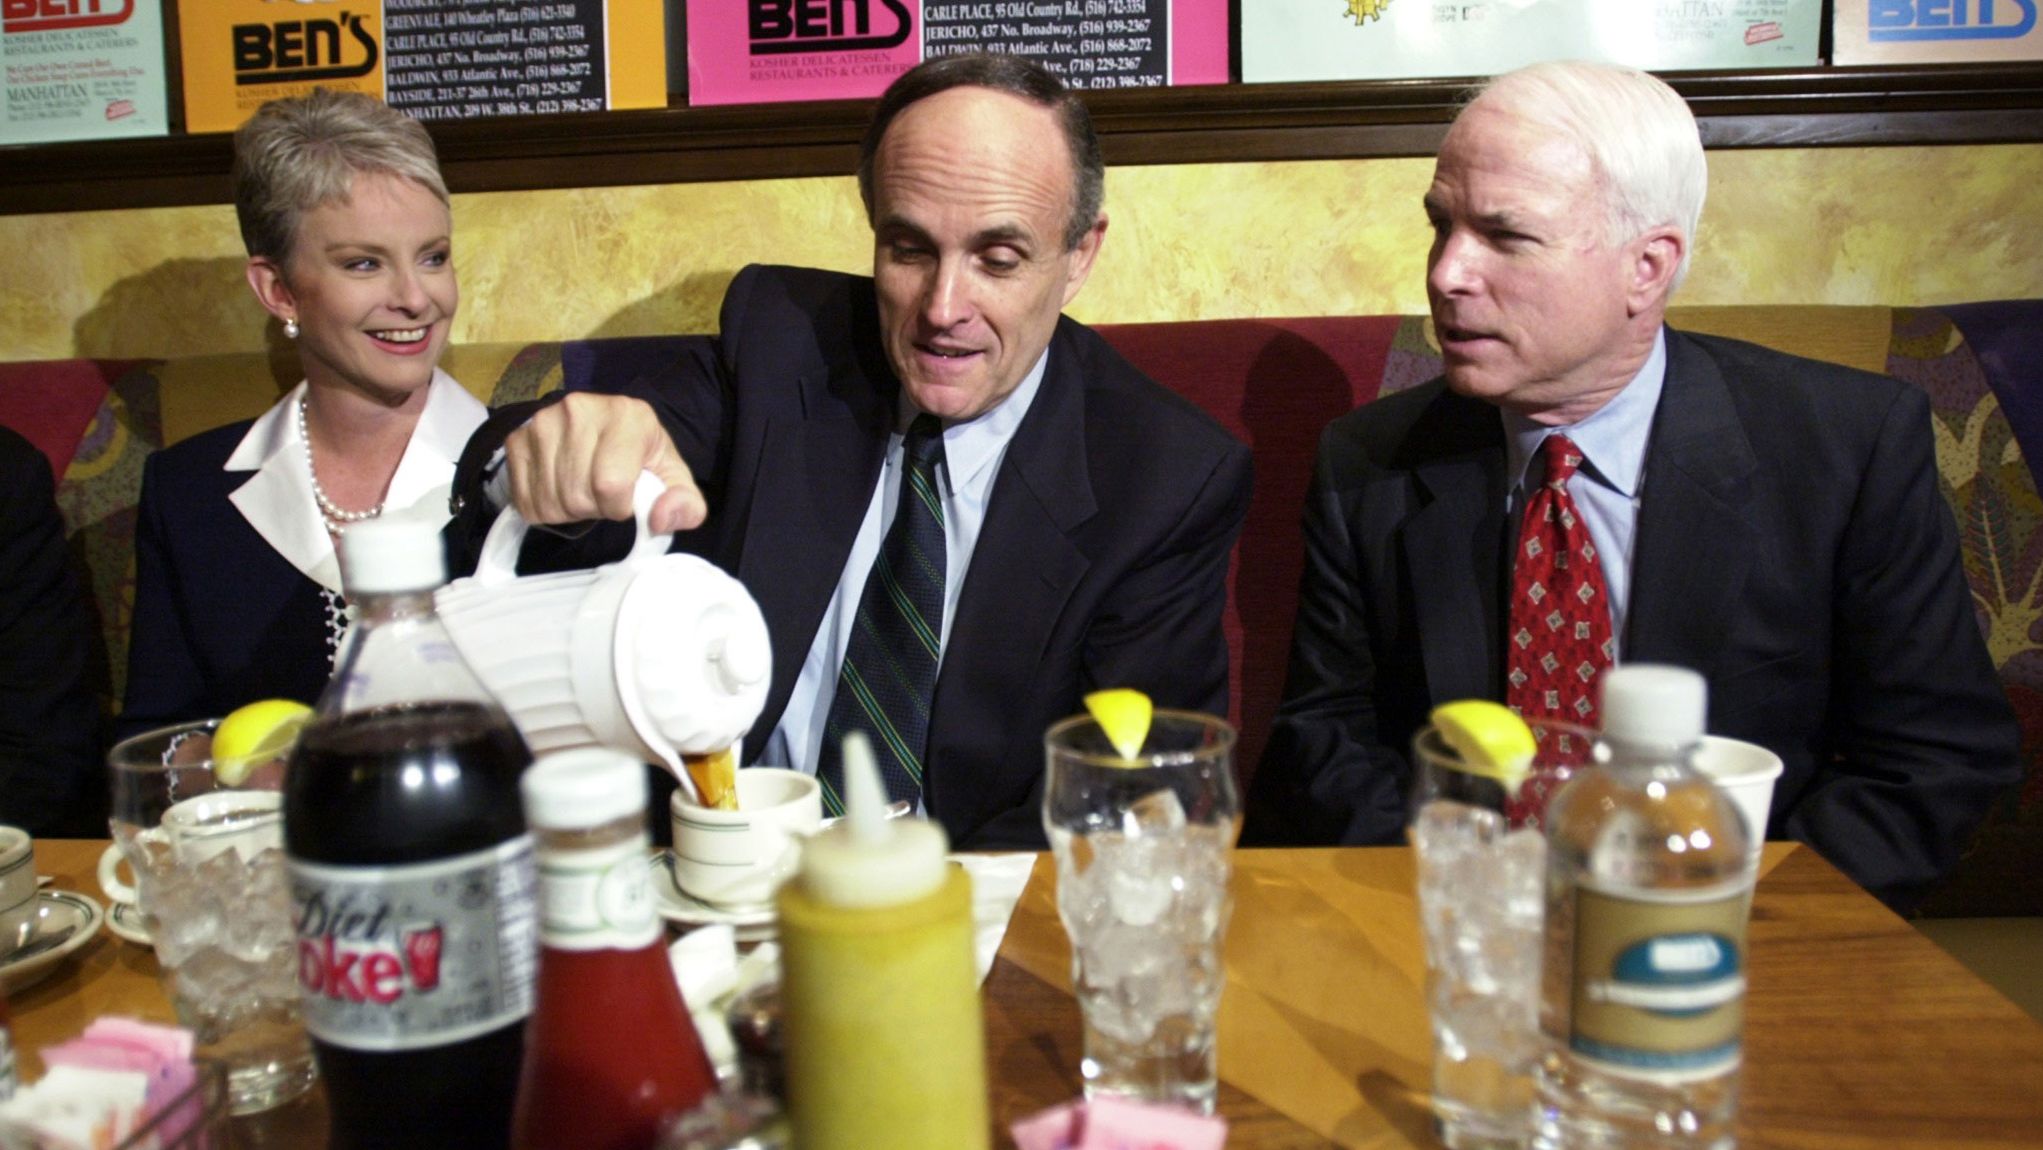 Giuliani pours coffee as he has breakfast with US Sen. John McCain and McCain's wife, Cindy, in April 2000. McCain came to New York to campaign for Giuliani, who was running for a US Senate seat. Giuliani dropped out of the race after announcing that he had prostate cancer and wanted to focus on treatment.